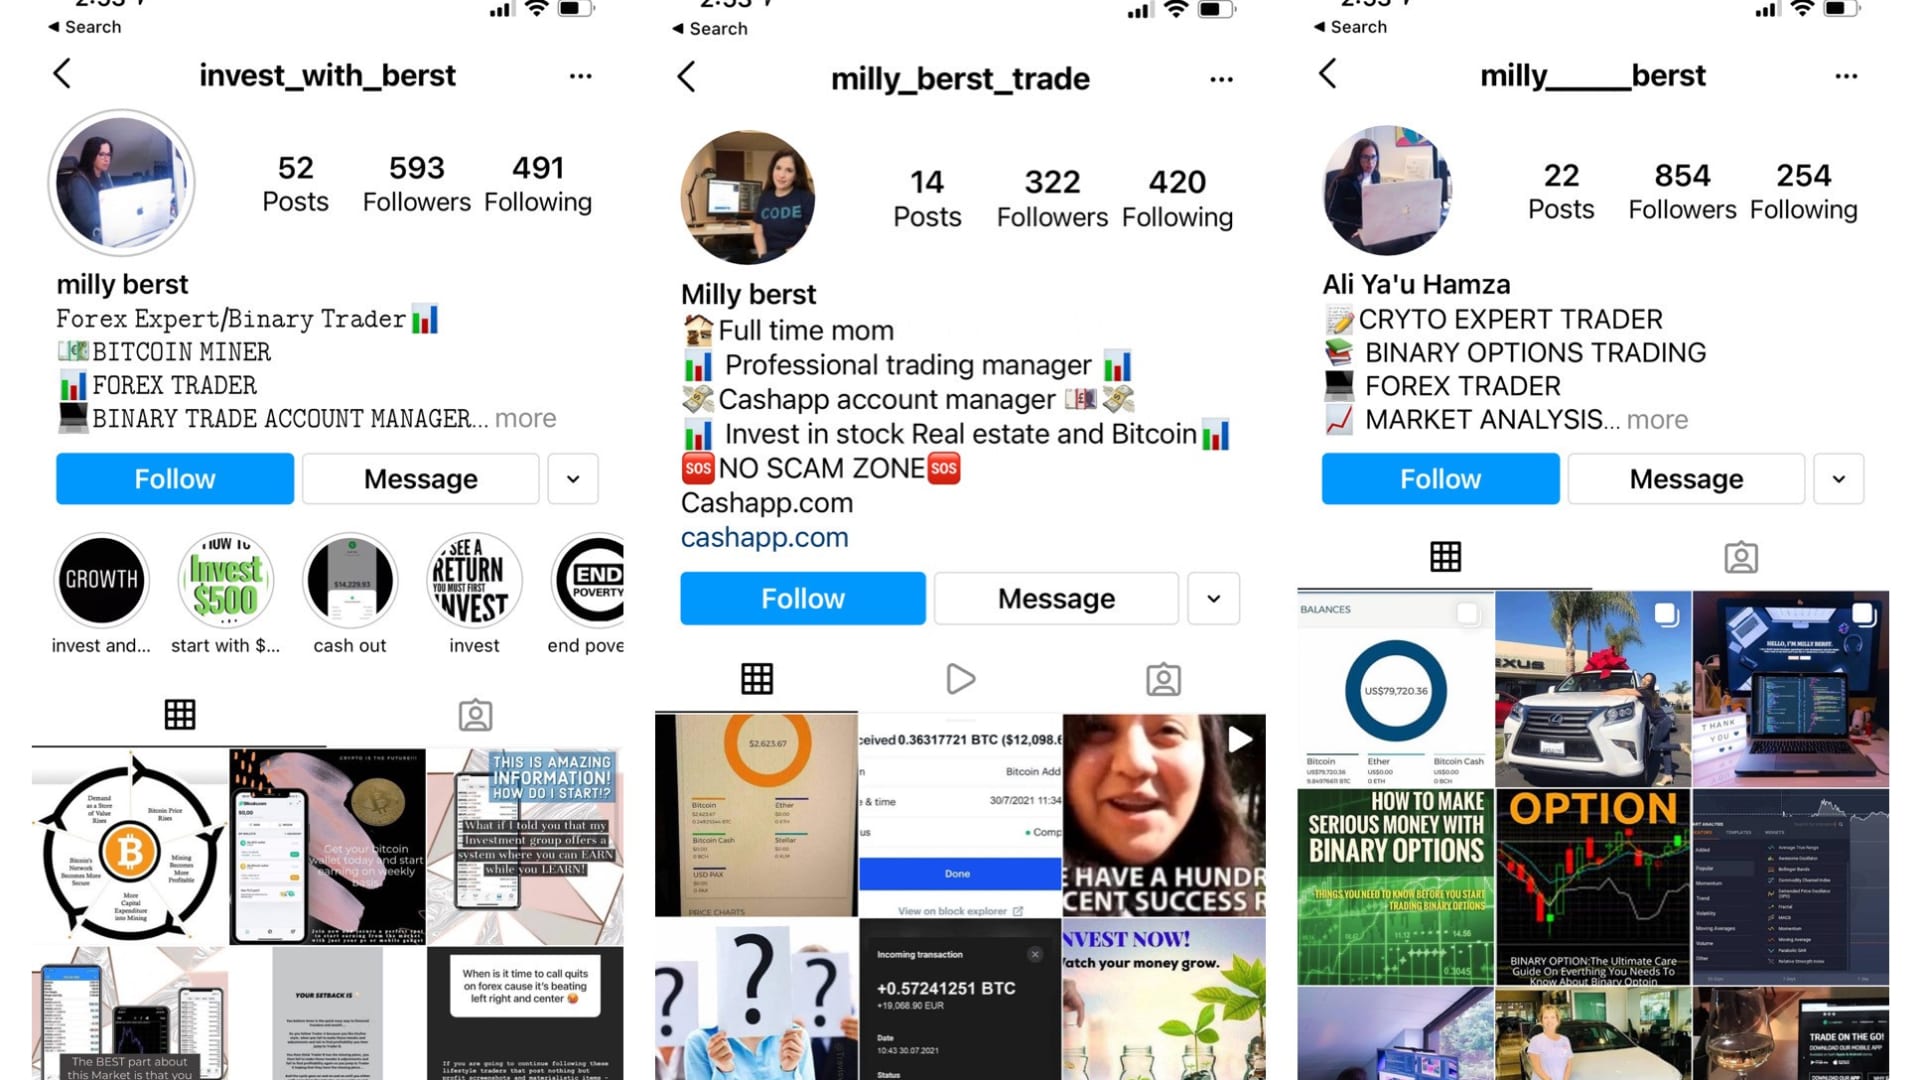 Several accounts impersonating Milly Berst posing as trading experts on Instagram.